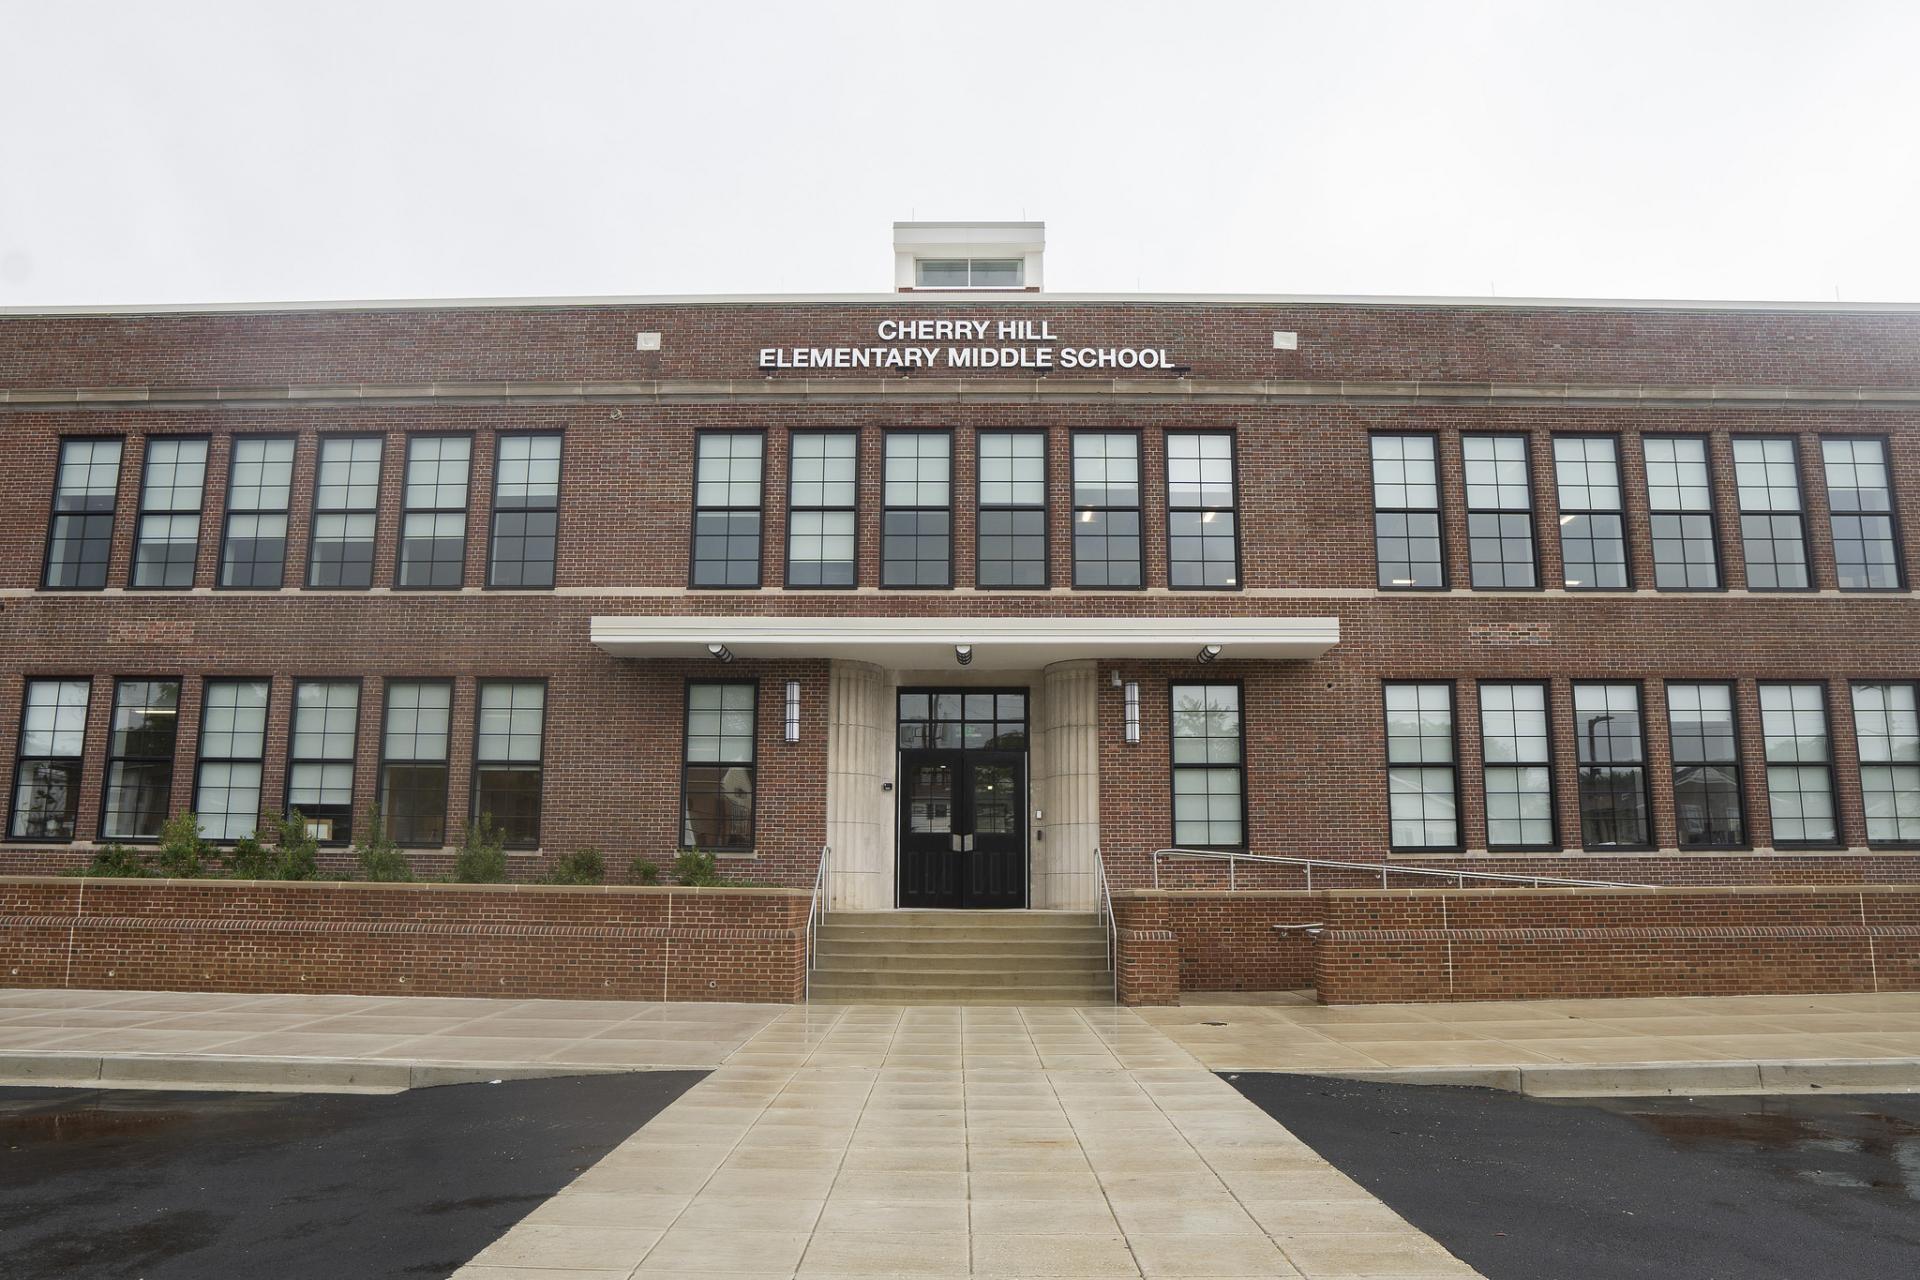 The Historic Cherry Hill Elementary/Middle School